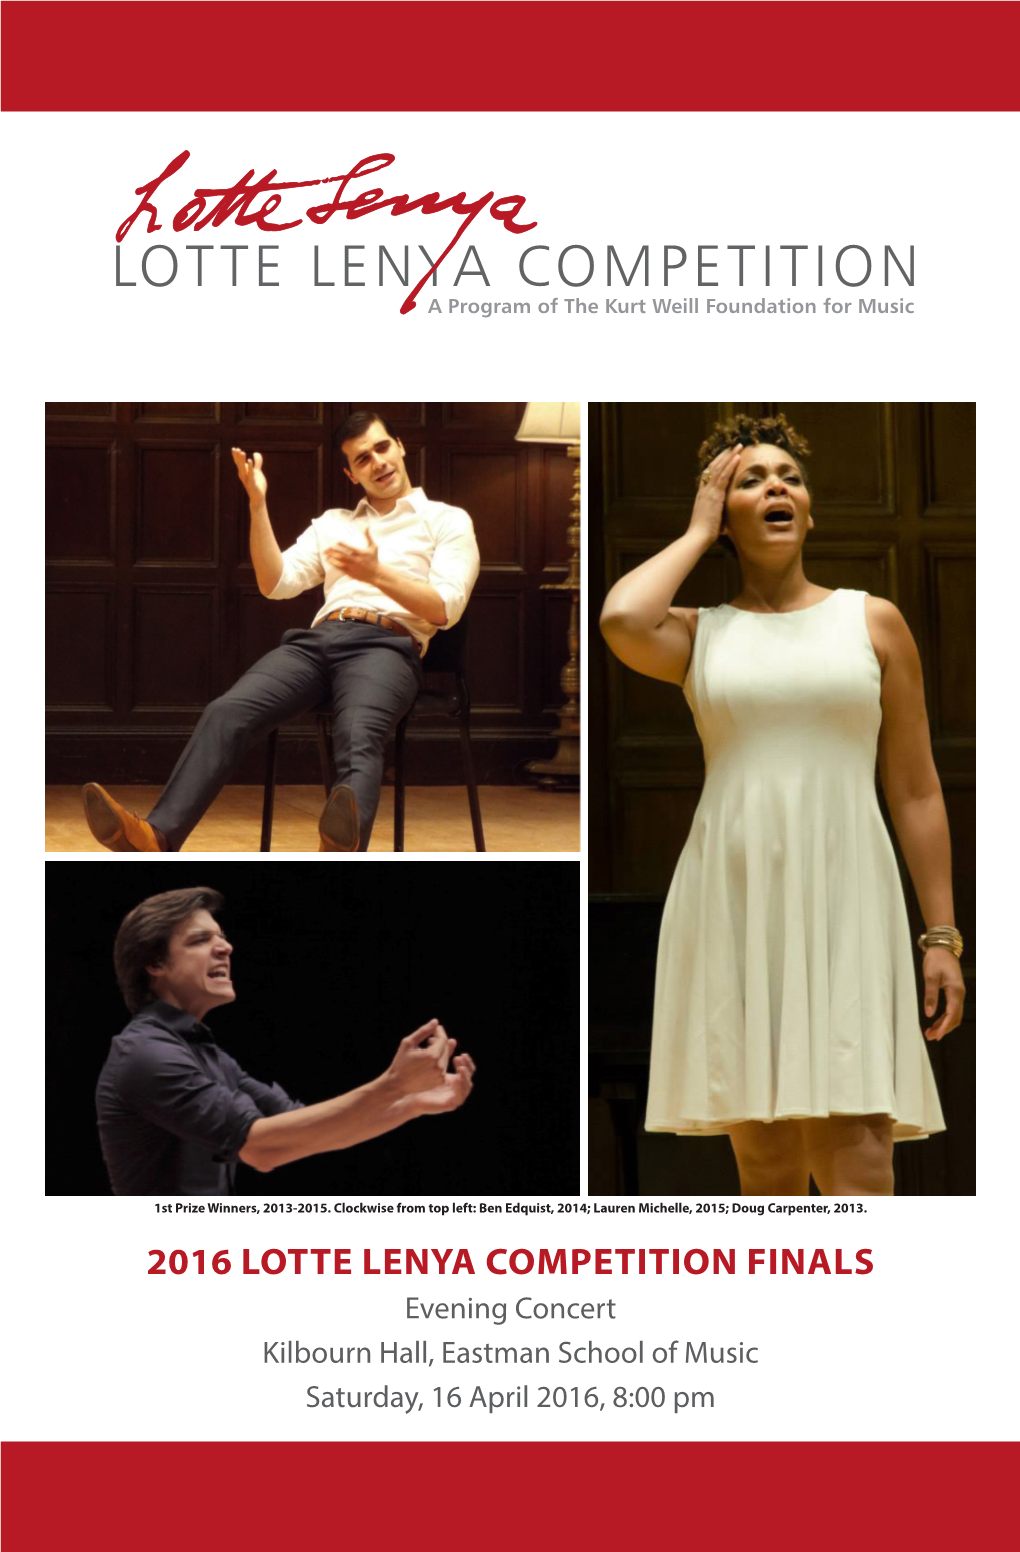 2016 LOTTE LENYA COMPETITION FINALS Evening Concert Kilbourn Hall, Eastman School of Music Saturday, 16 April 2016, 8:00 Pm About the Lotte Lenya Competition